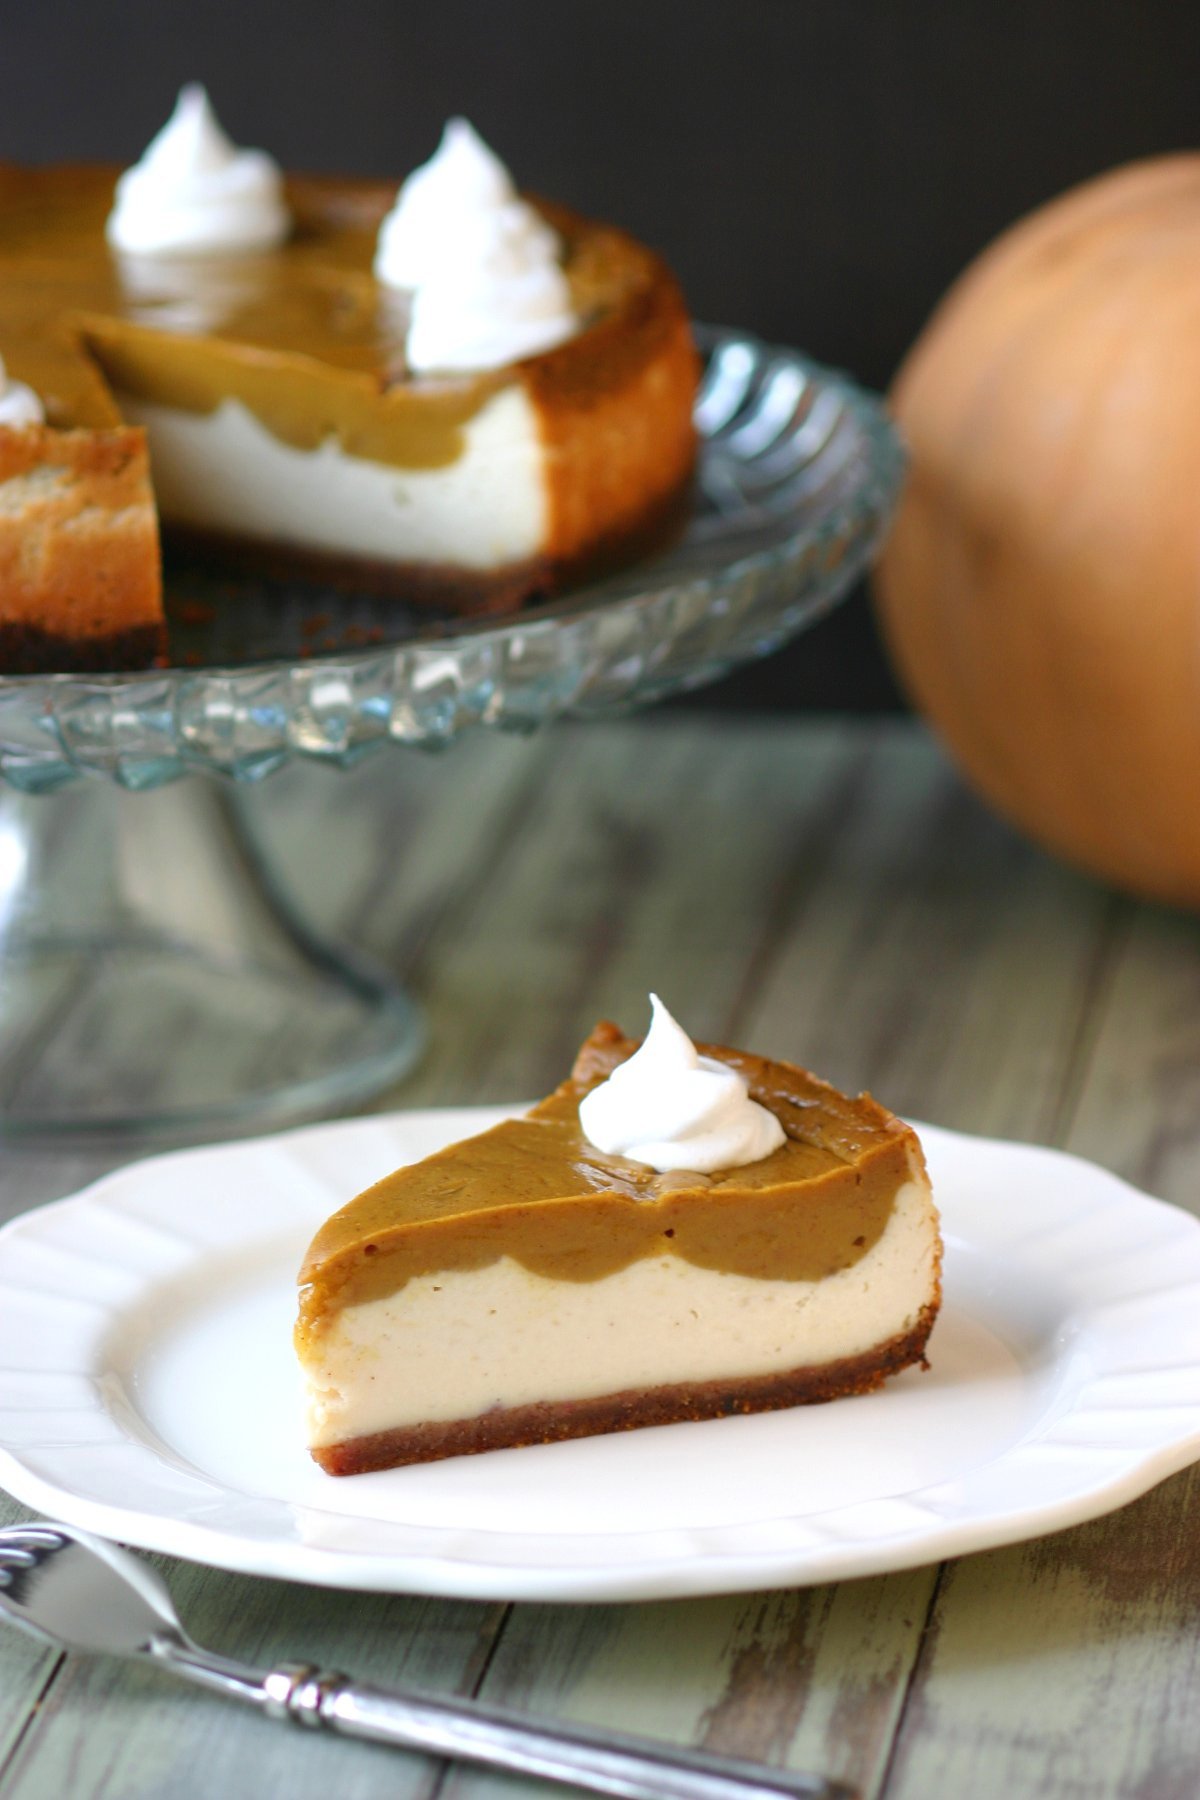 This recipe for Vegan Pumpkin Pie Cheesecake combines two of your favorite desserts to create one smooth, spiced, and rich sight to behold.